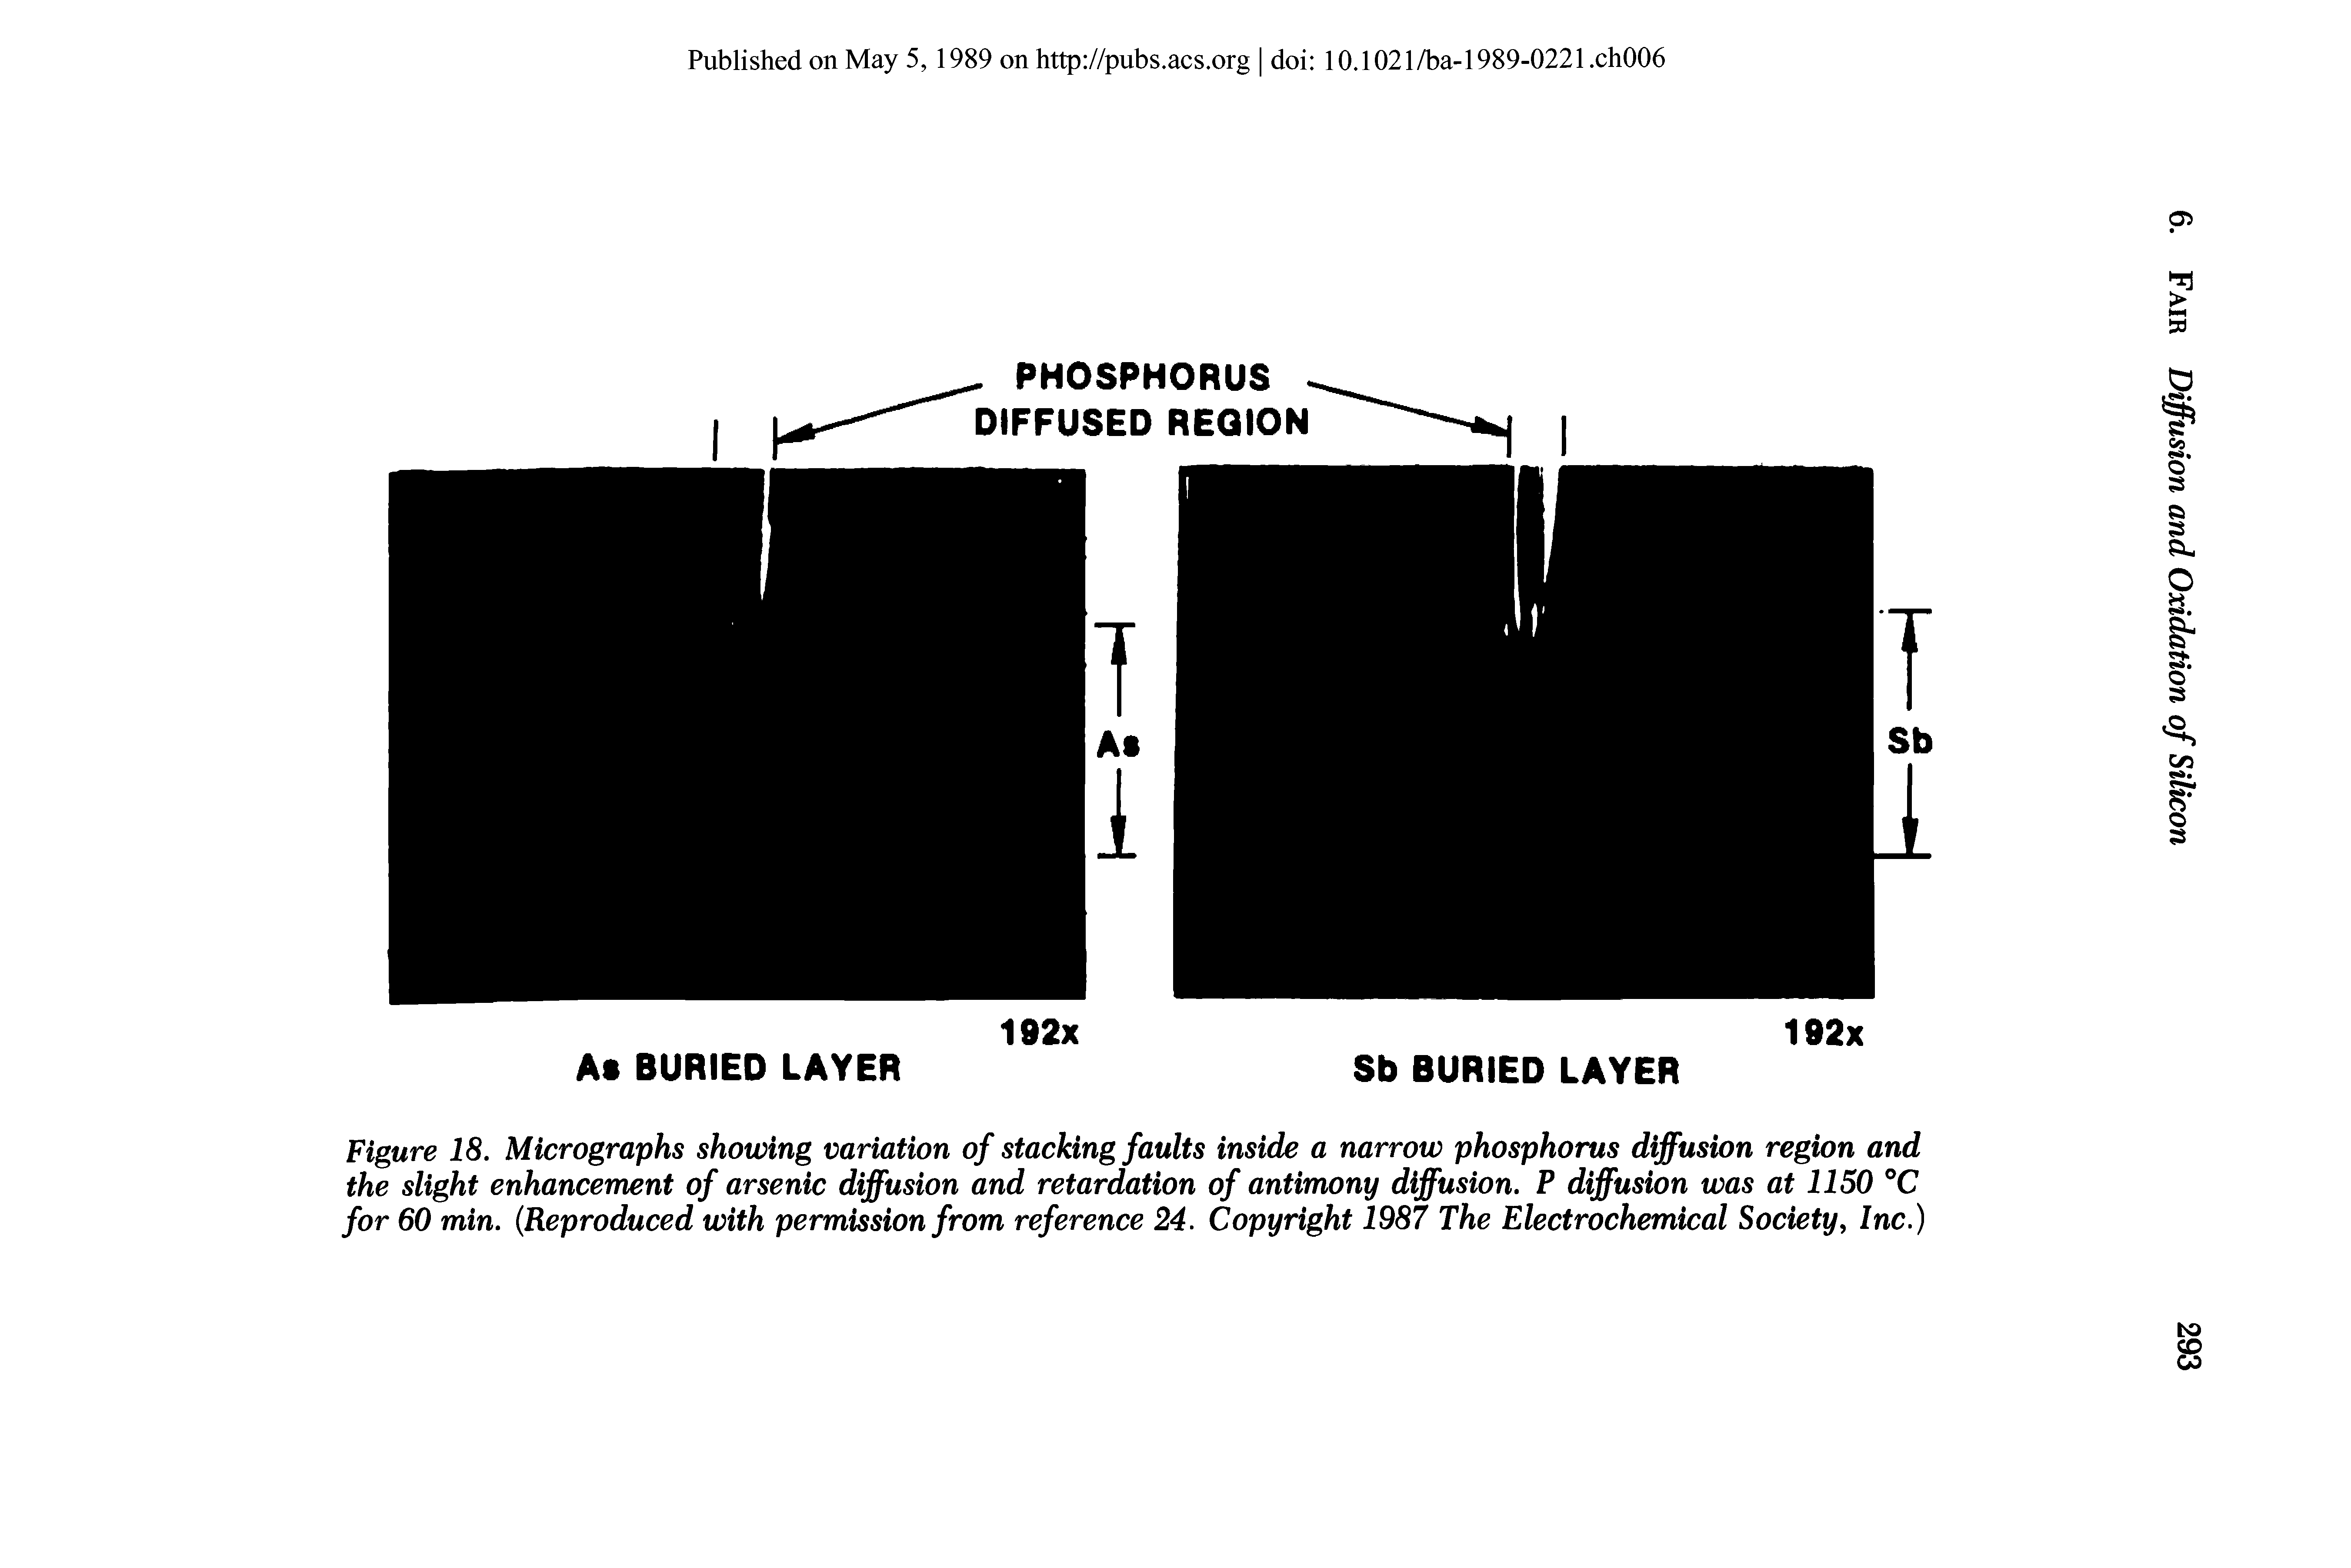 Figure 18. Micrographs showing variation of stacking faults inside a narrow phosphorus diffusion region and the slight enhancement of arsenic diffusion and retardation of antimony diffusion. P diffusion was at 1150 °C for 60 min. (Reproduced with permission from reference 24. Copyright 1987 The Electrochemical Society, Inc.)...